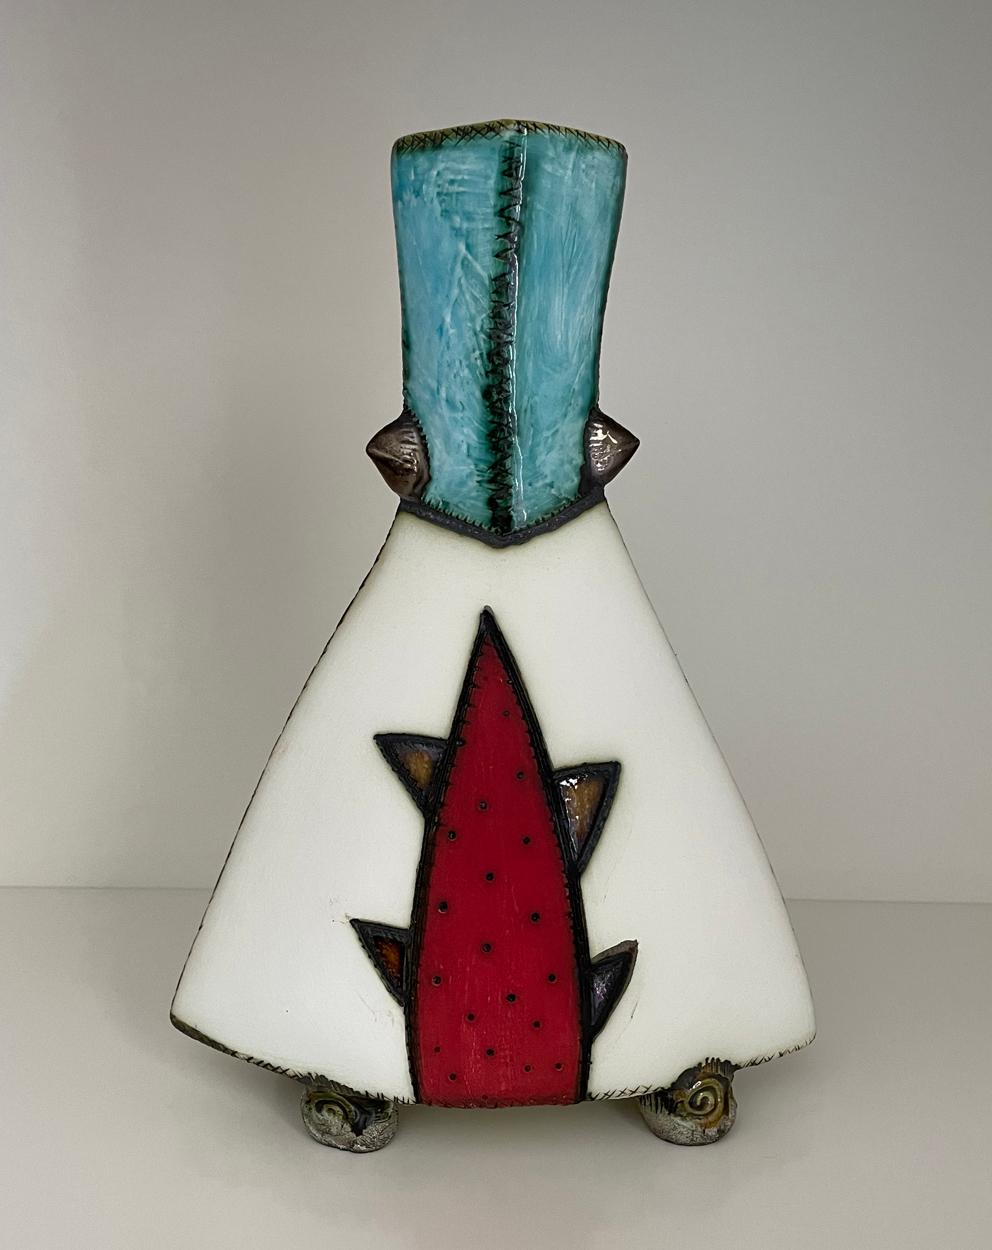 A small pottery vase by widely collected South African ceramicist Charmaine Haines, produced 2020.


Charmaine Haines was born in 1963 in Grahamstown and trained under Hylton Nel at the Port Elizabeth Technikon and obtained a Higher Diploma in